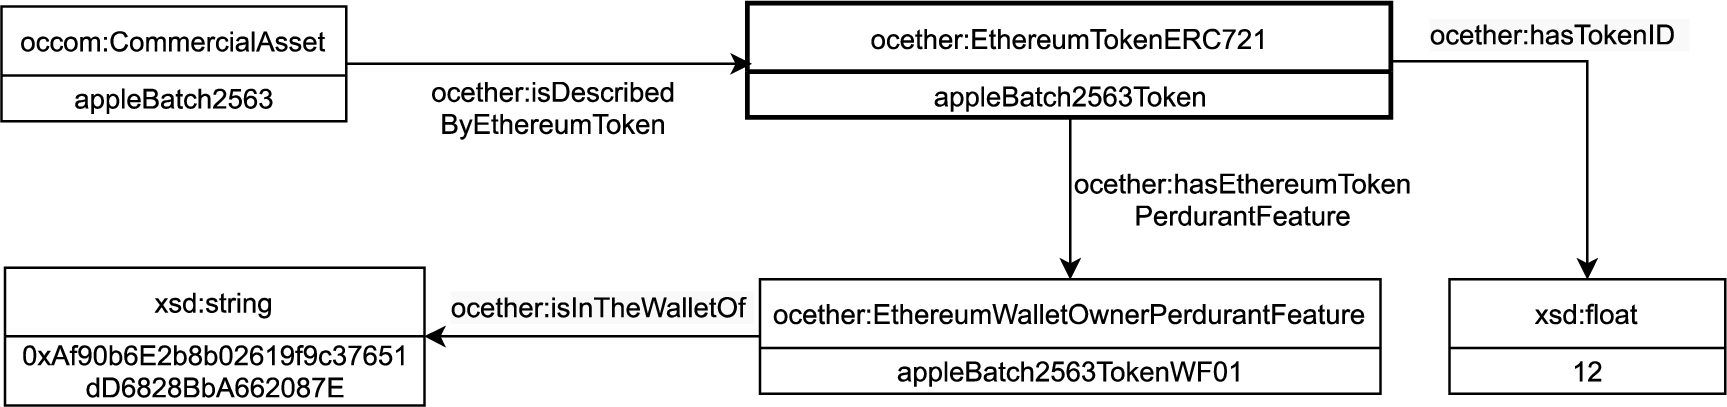 UML diagram exemplifying the publication of the token for apple batch 2563 in the OC-Ethereum ontology.